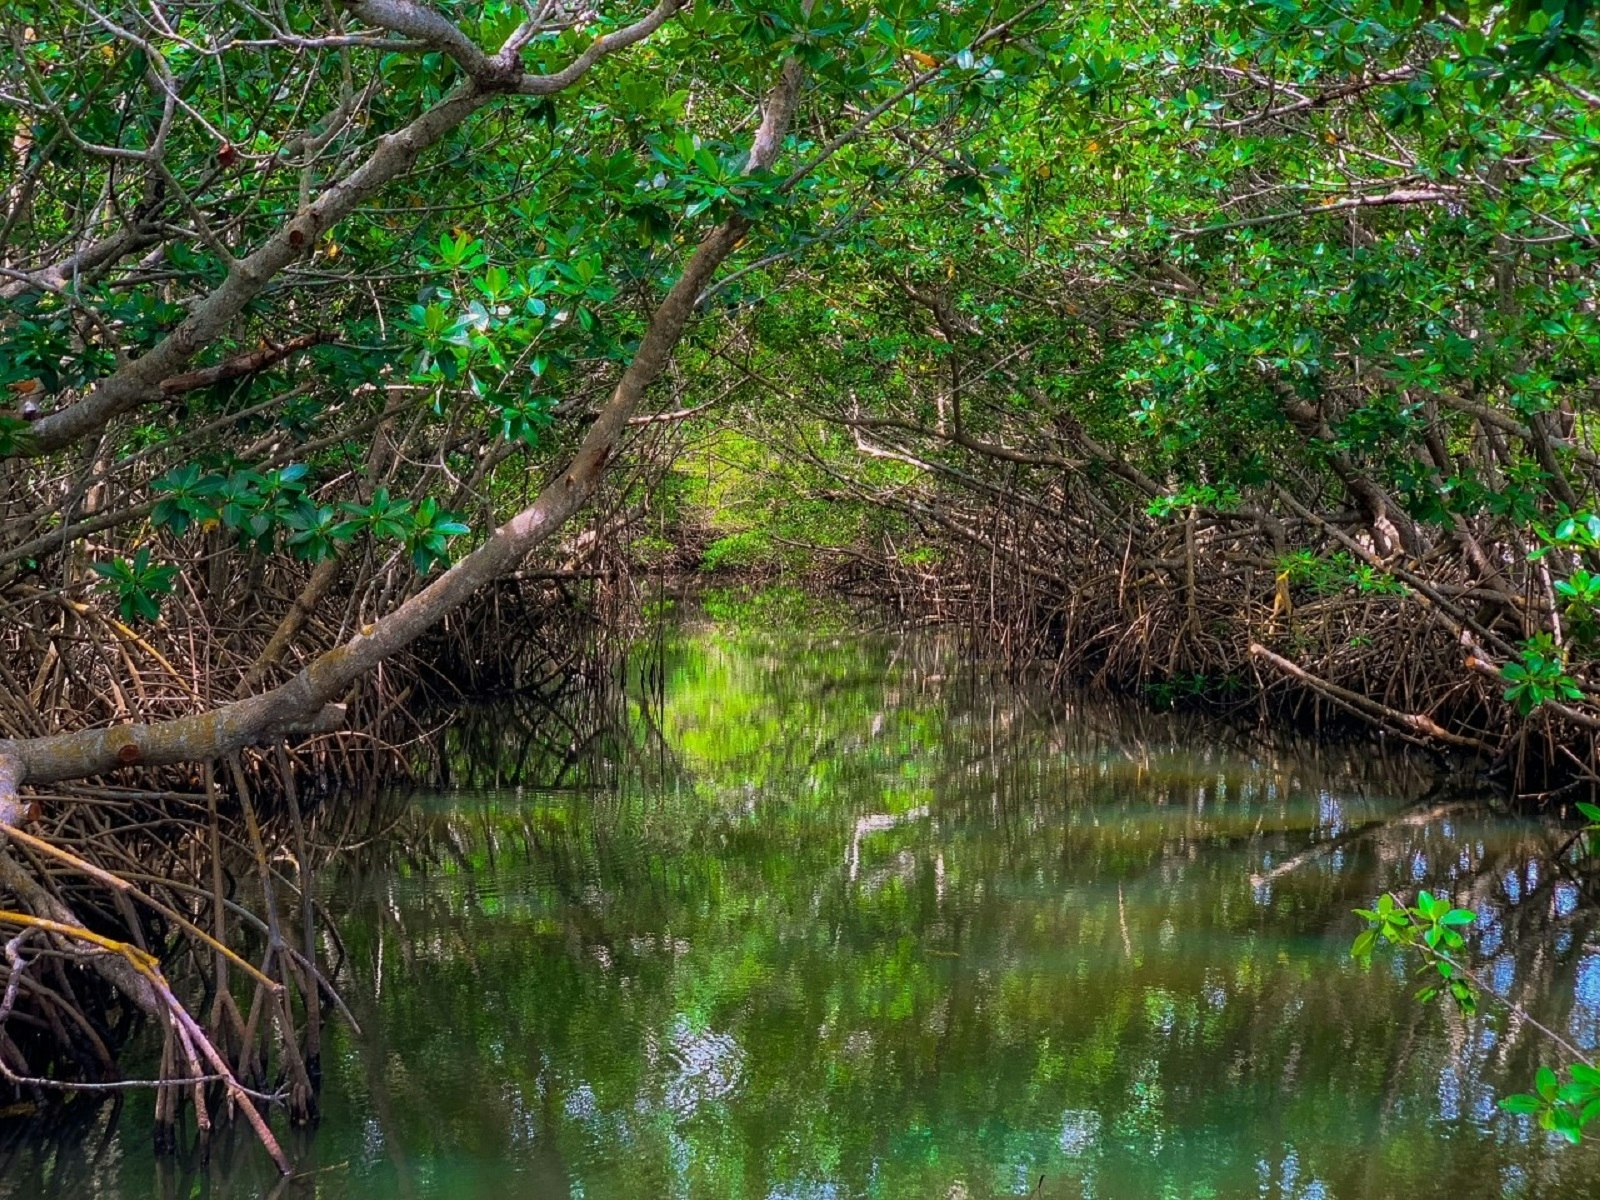 Mangrove forest growing over still water